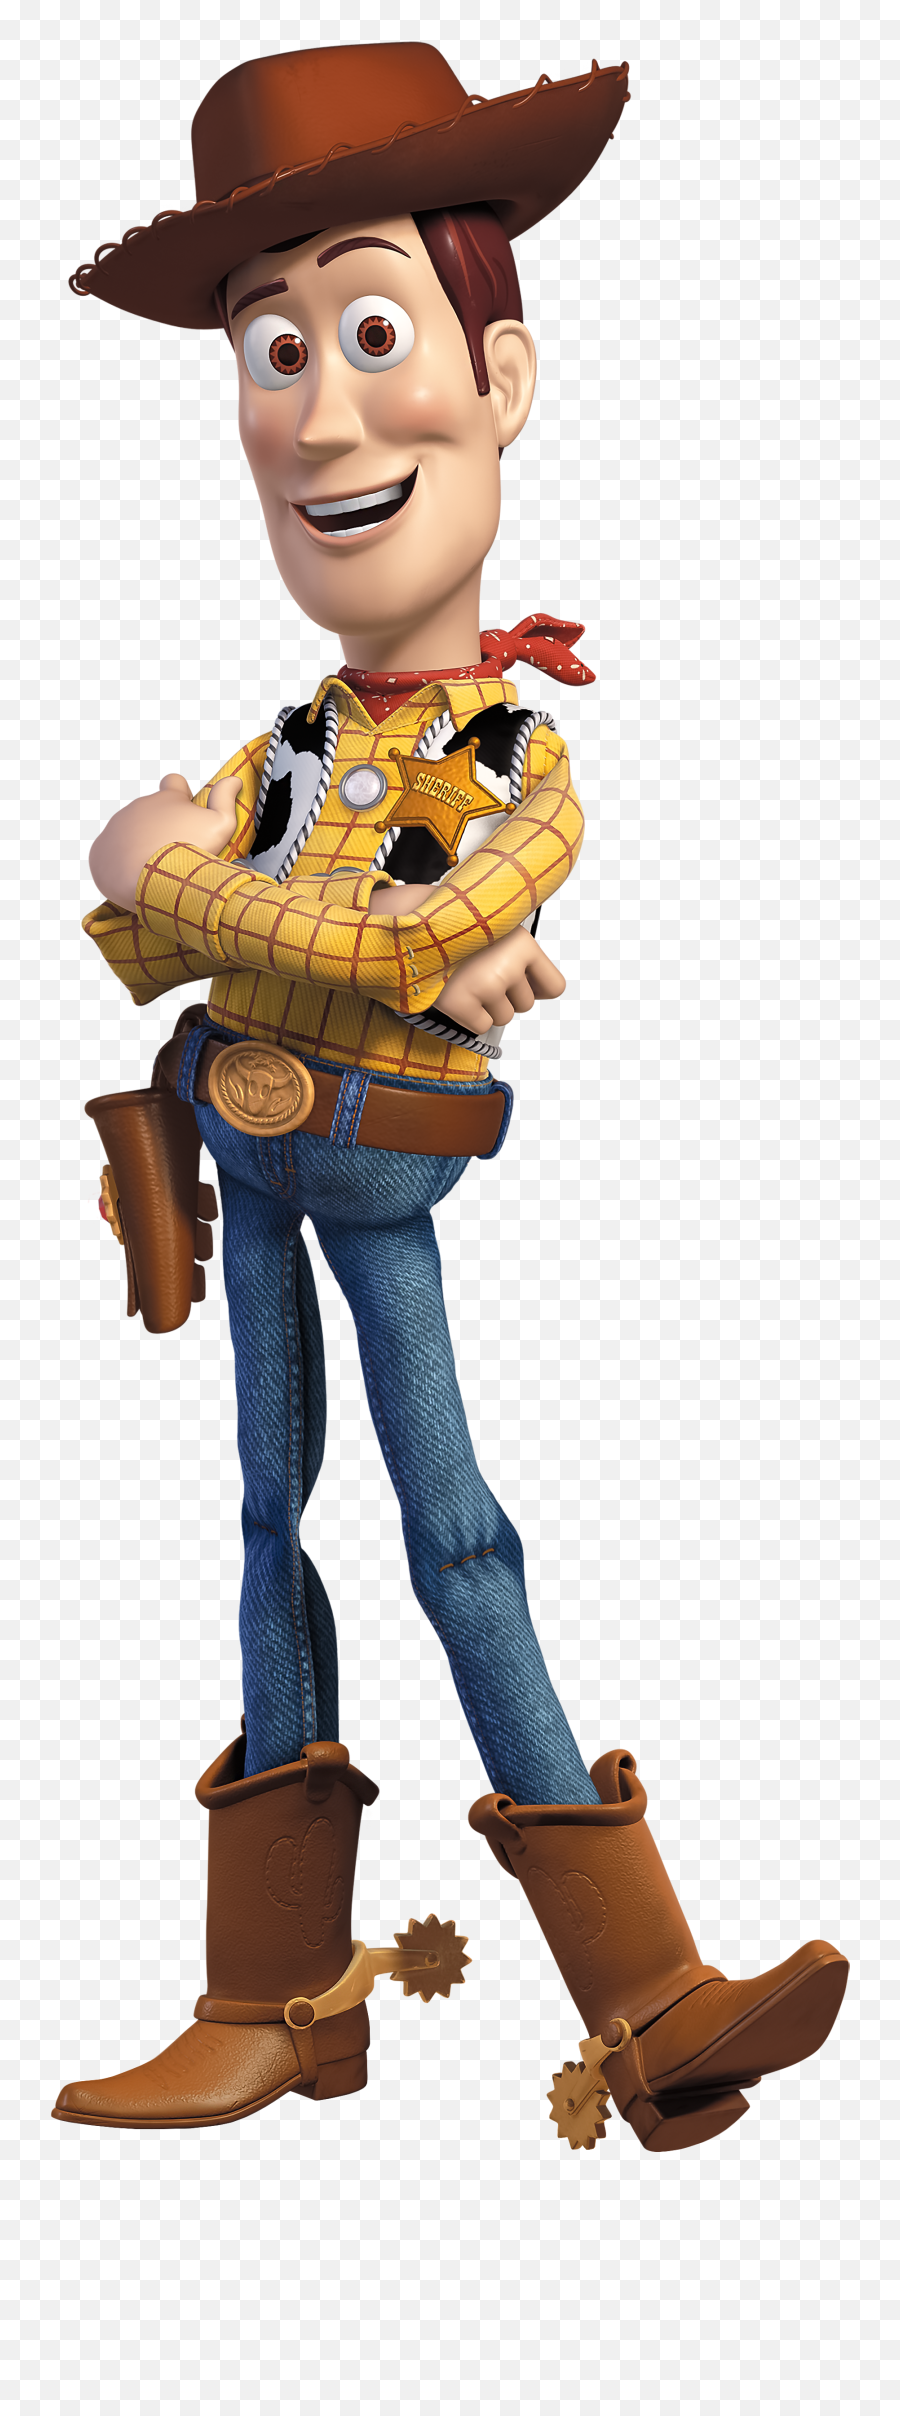 Transparent Clipart Woody Toy Story Png